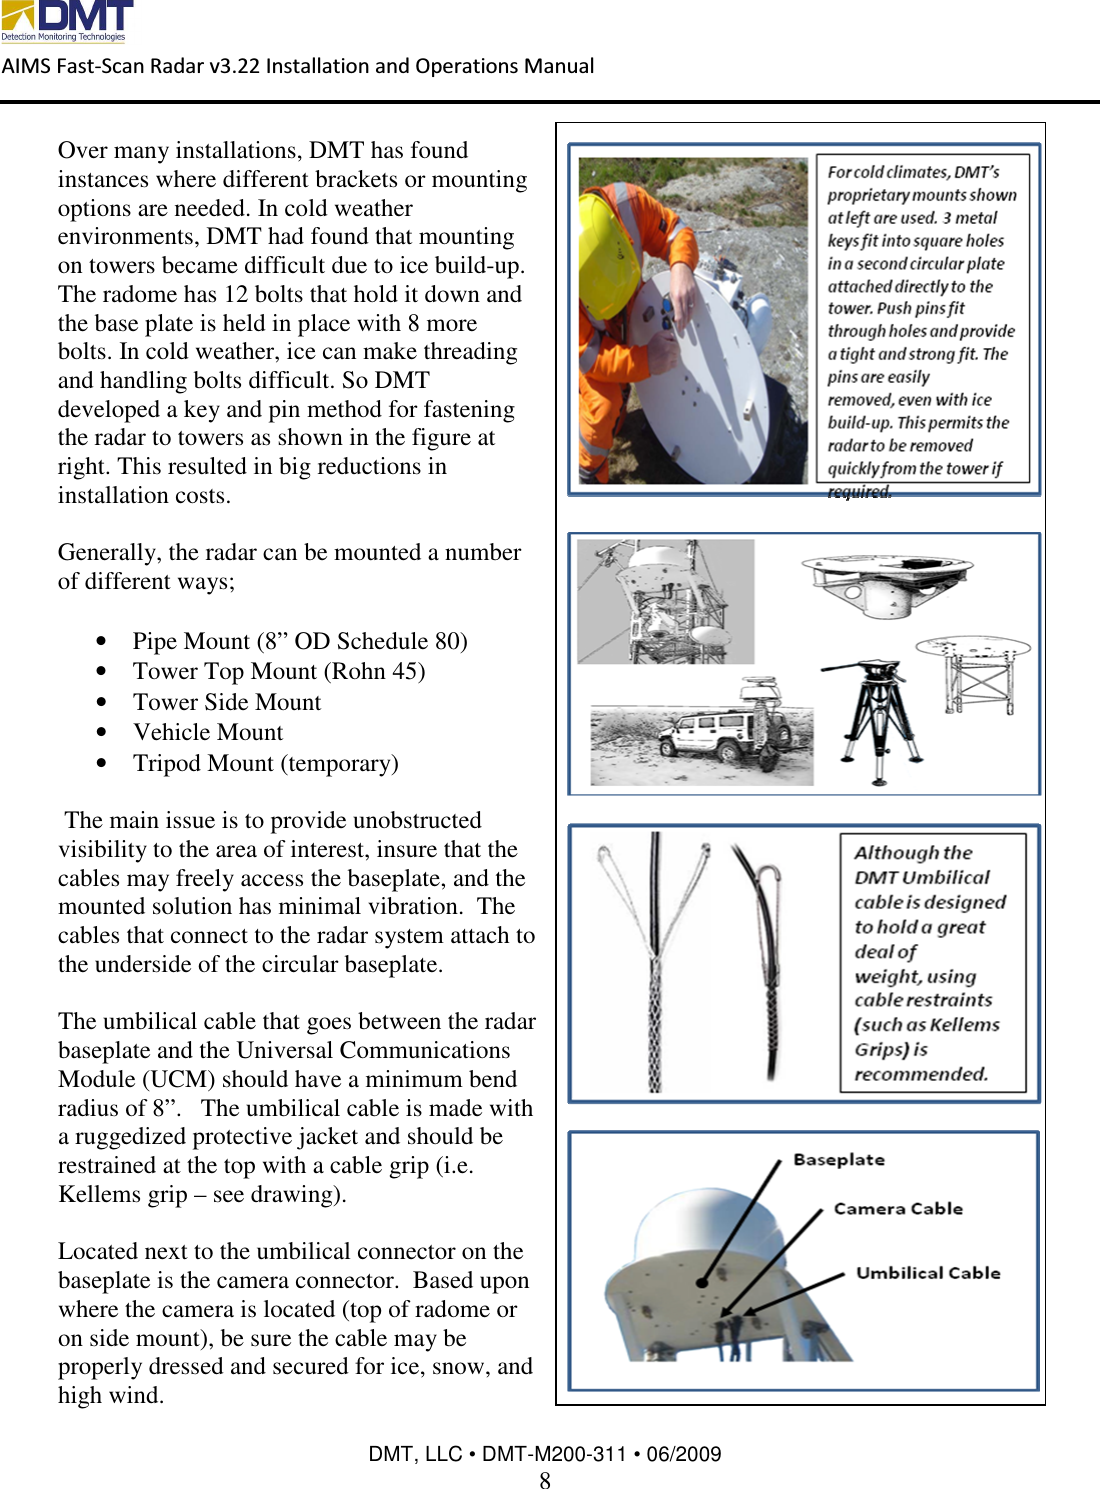  AIMS Fast-Scan Radar v3.22 Installation and Operations Manual    DMT, LLC • DMT-M200-311 • 06/2009 8  Over many installations, DMT has found instances where different brackets or mounting options are needed. In cold weather environments, DMT had found that mounting on towers became difficult due to ice build-up. The radome has 12 bolts that hold it down and the base plate is held in place with 8 more bolts. In cold weather, ice can make threading and handling bolts difficult. So DMT developed a key and pin method for fastening the radar to towers as shown in the figure at right. This resulted in big reductions in installation costs.  Generally, the radar can be mounted a number of different ways;  • Pipe Mount (8” OD Schedule 80) • Tower Top Mount (Rohn 45) • Tower Side Mount • Vehicle Mount • Tripod Mount (temporary)   The main issue is to provide unobstructed visibility to the area of interest, insure that the cables may freely access the baseplate, and the mounted solution has minimal vibration.  The cables that connect to the radar system attach to the underside of the circular baseplate.  The umbilical cable that goes between the radar baseplate and the Universal Communications Module (UCM) should have a minimum bend radius of 8”.   The umbilical cable is made with a ruggedized protective jacket and should be restrained at the top with a cable grip (i.e. Kellems grip – see drawing).    Located next to the umbilical connector on the baseplate is the camera connector.  Based upon where the camera is located (top of radome or on side mount), be sure the cable may be properly dressed and secured for ice, snow, and high wind.  